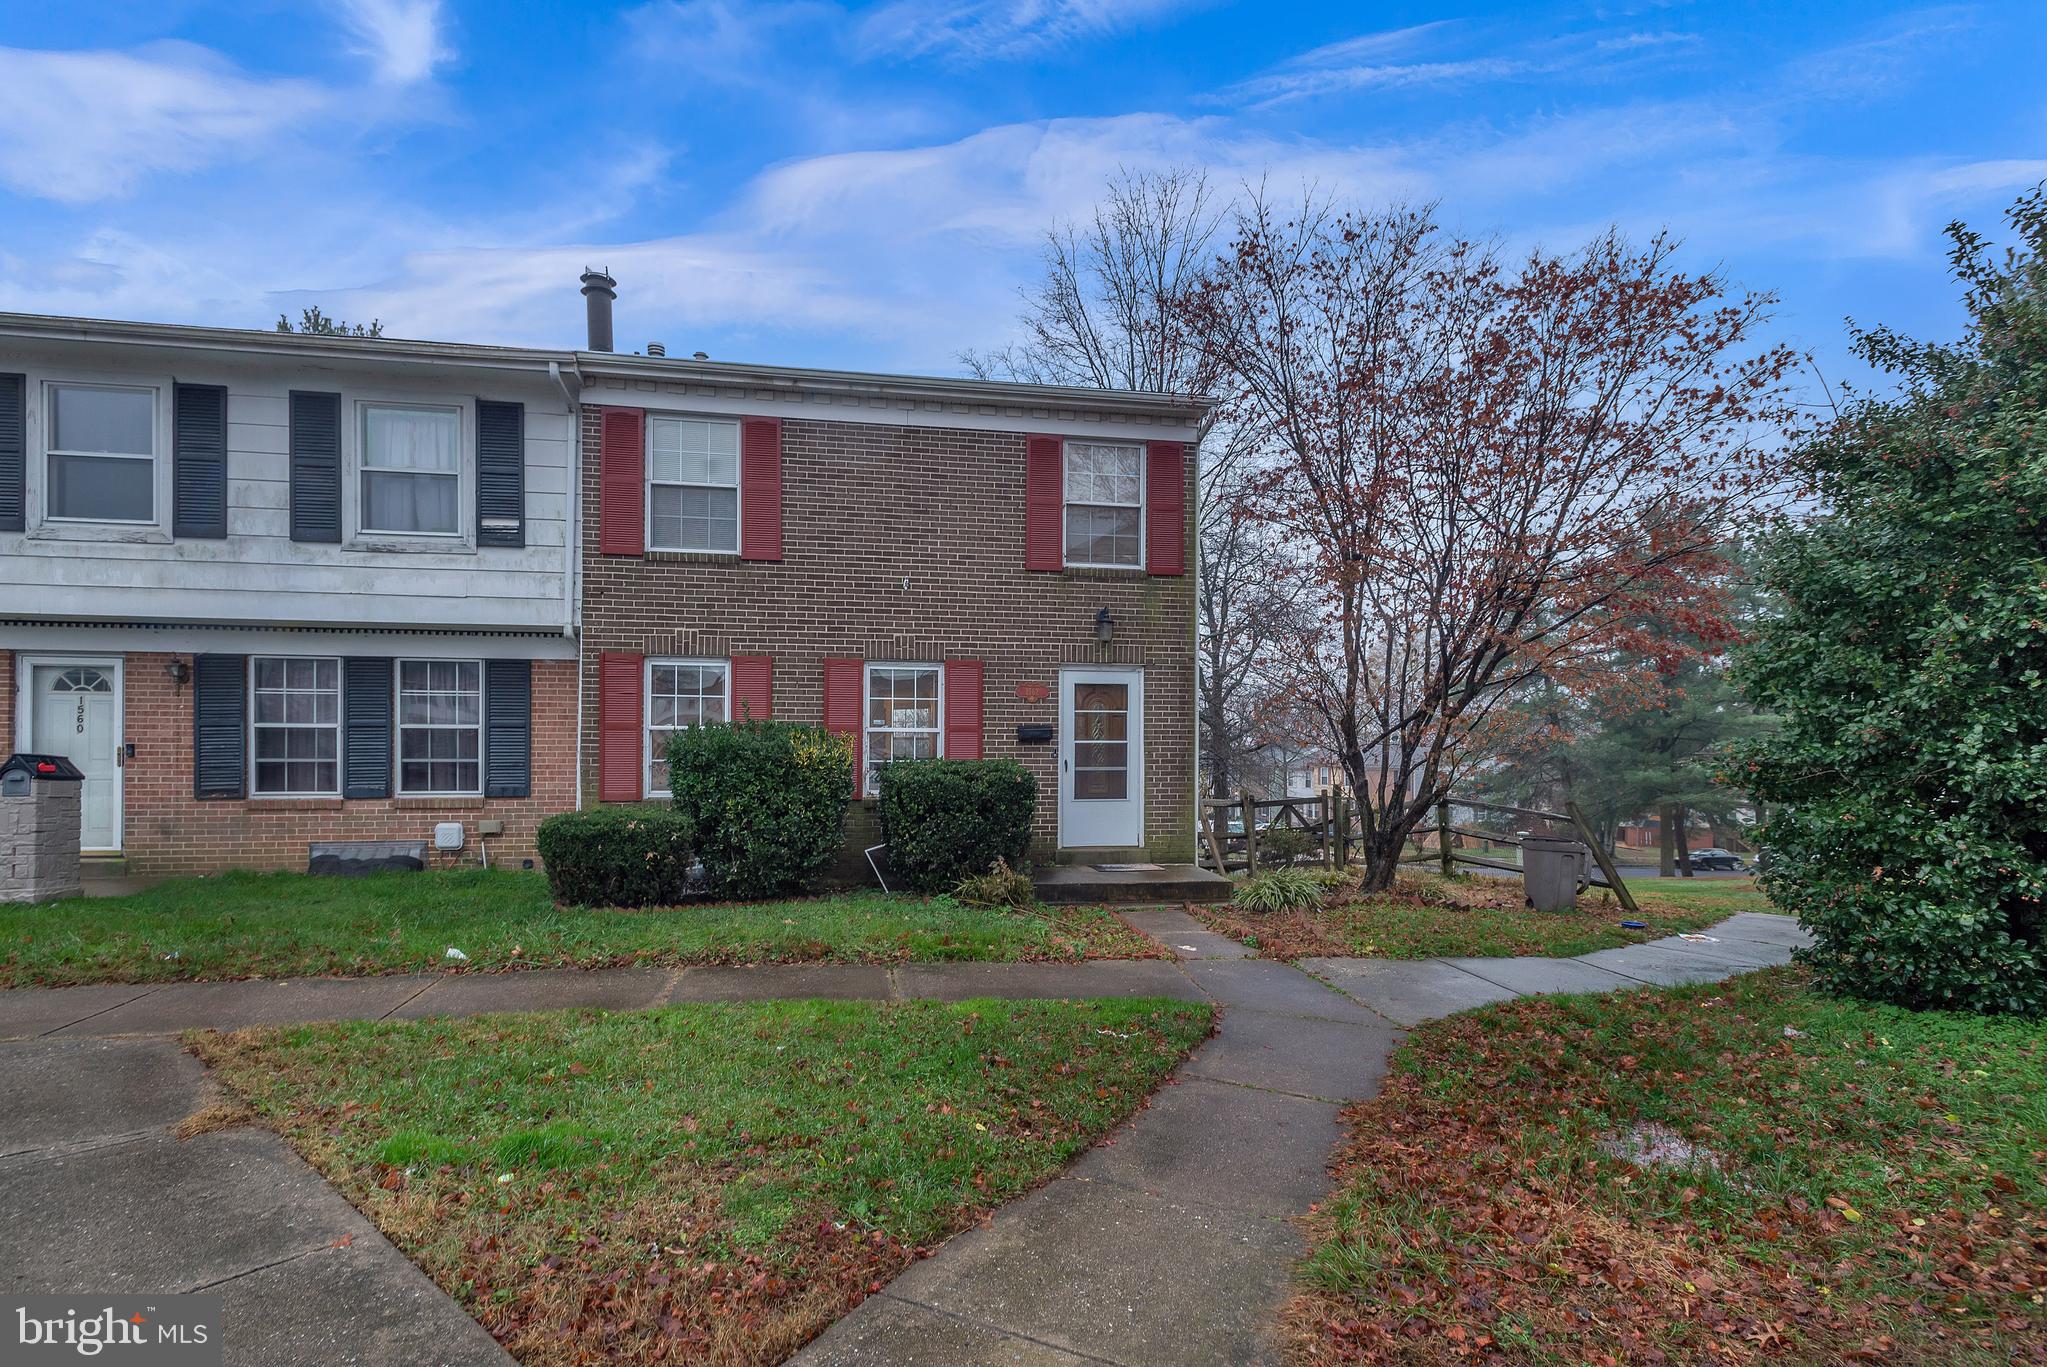 Welcome to this 3 bedroom 2 full bathroom 2 half bathroom end of row townhome in Harford Square. Wal